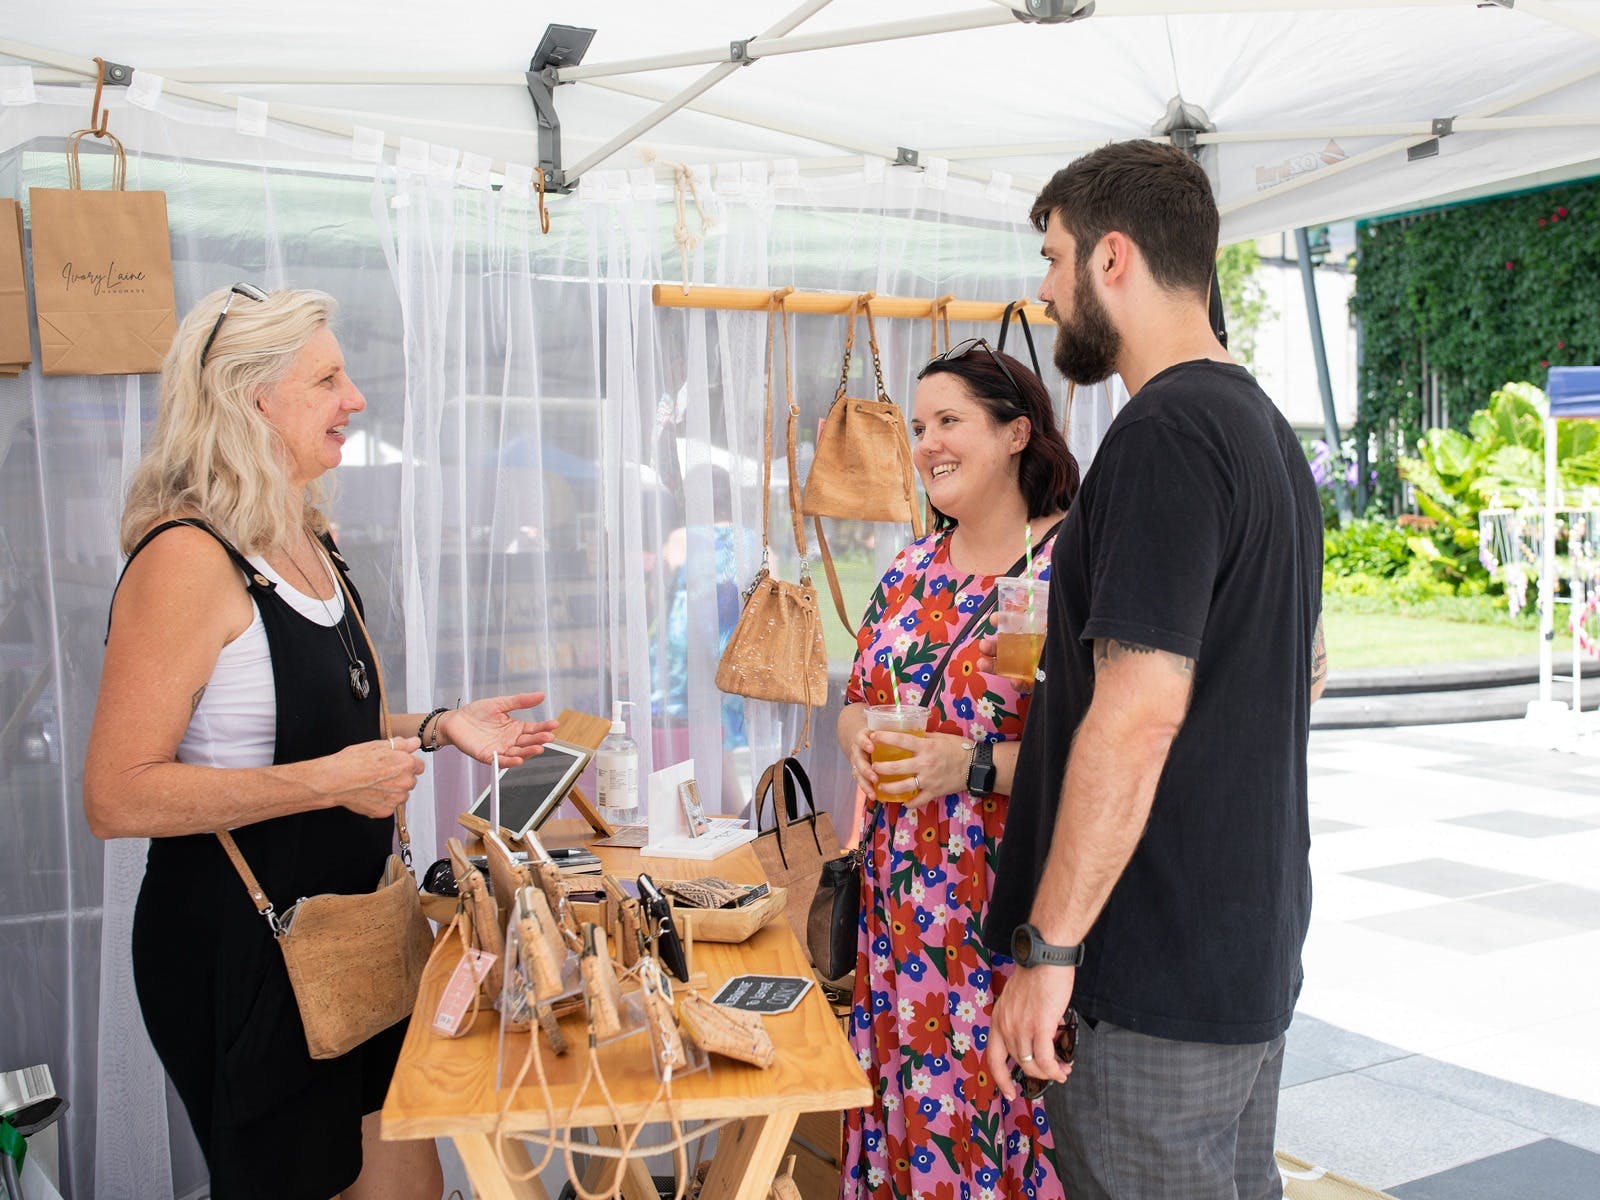 Get your shopping fix at these markets... – Discover Ipswich